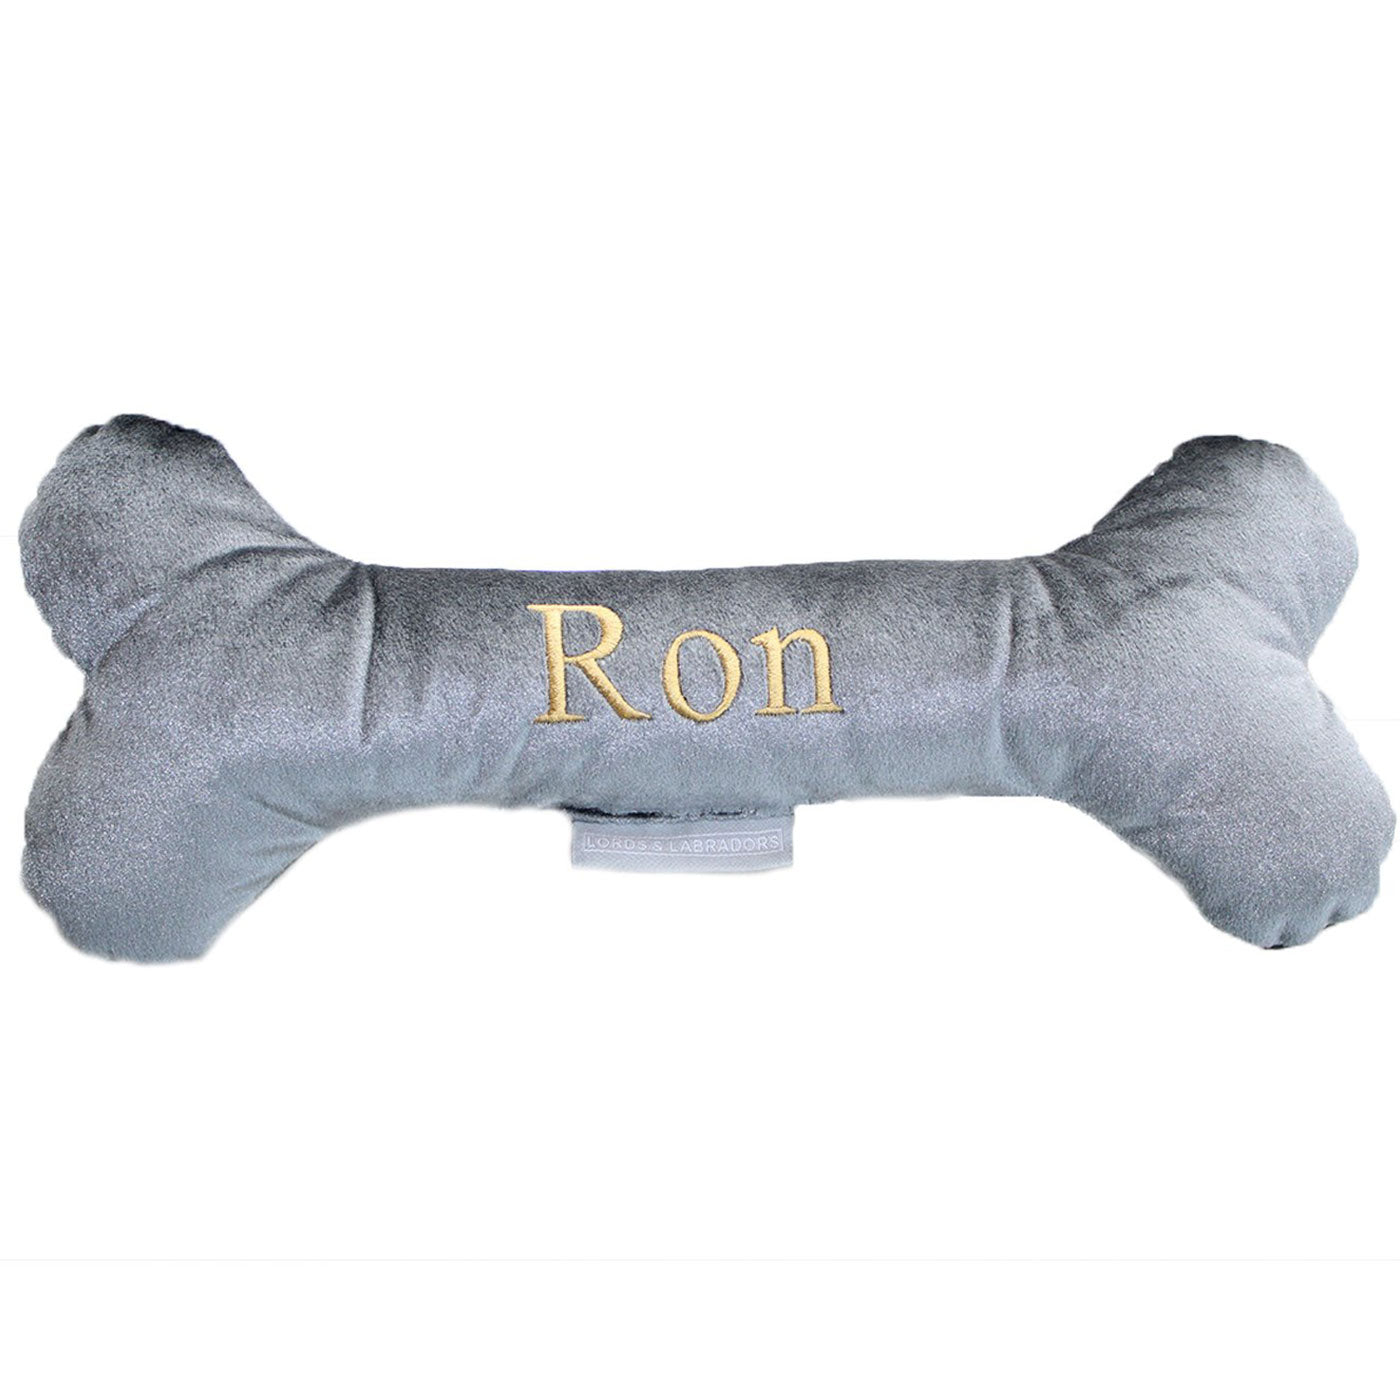 [color:elephant velvet] Discover The Perfect Bone For Dogs, Luxury Dog Bone Toy In Elephant Velvet, Available To Personalize Now at Lords & Labradors US